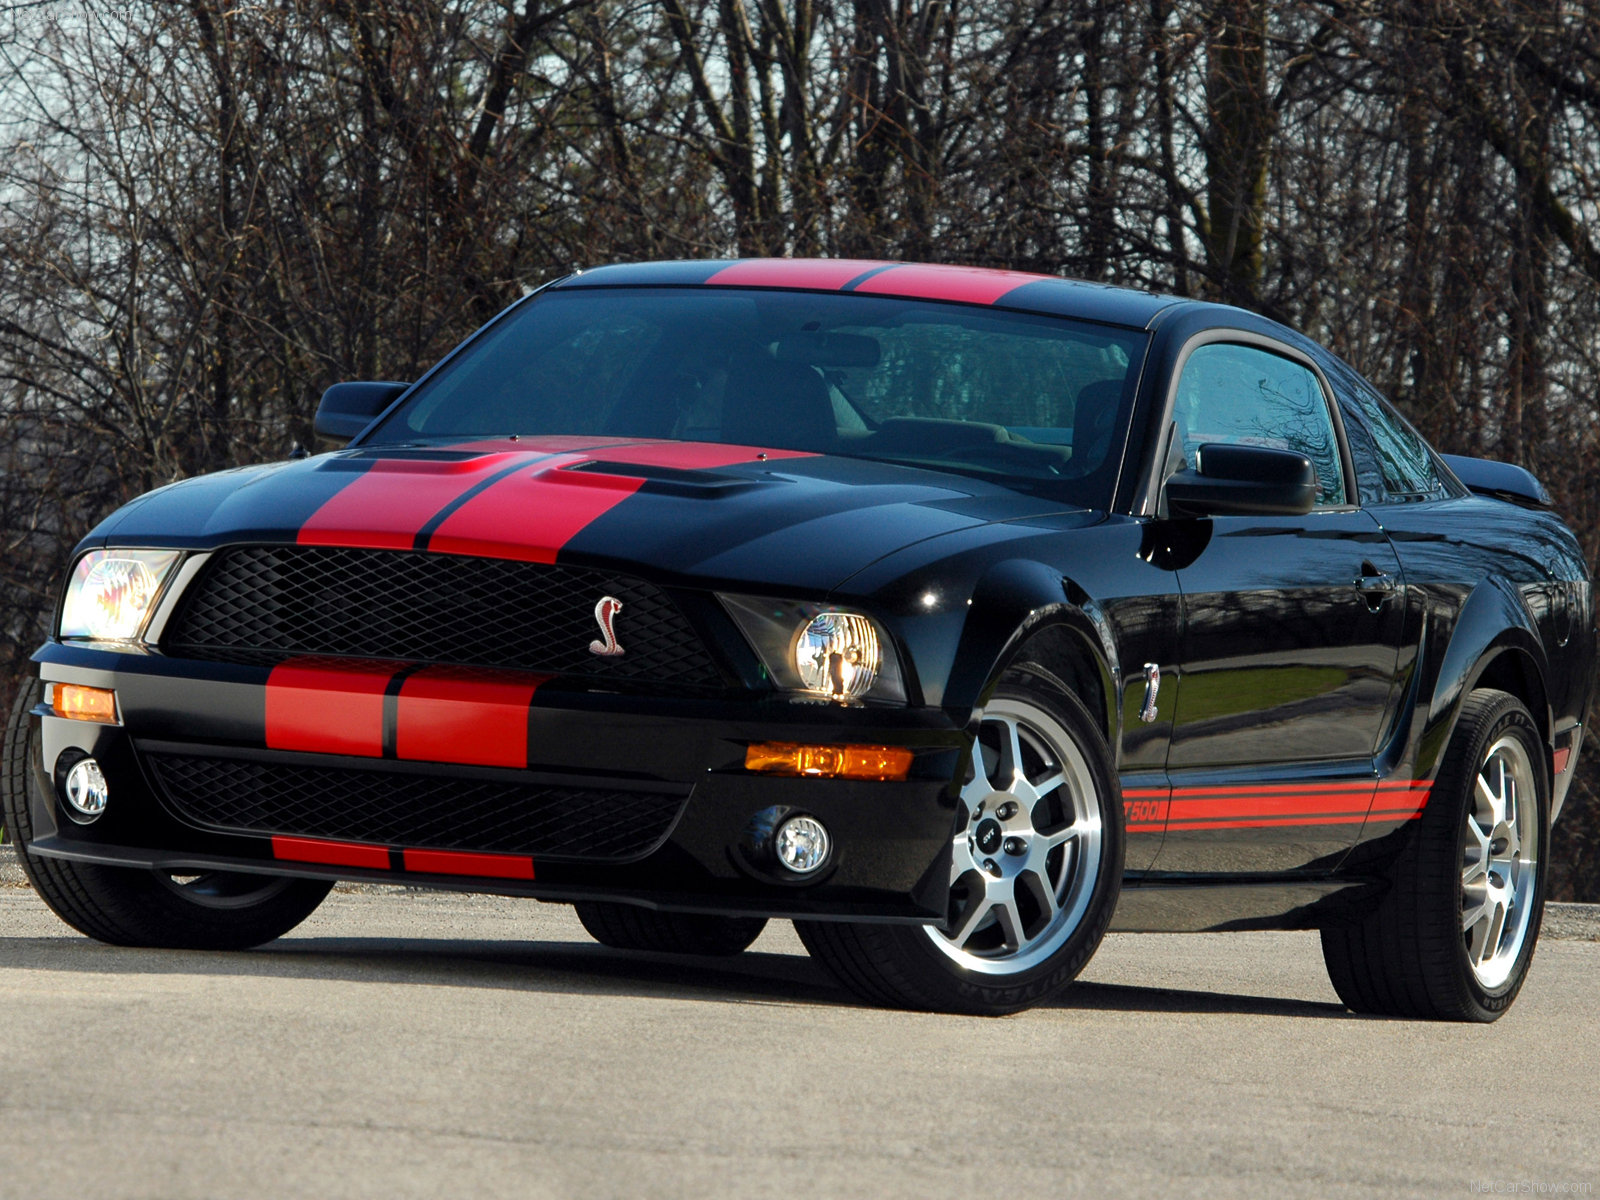 Фото Ford Mustang Shelby GT500 Red Stripe. 